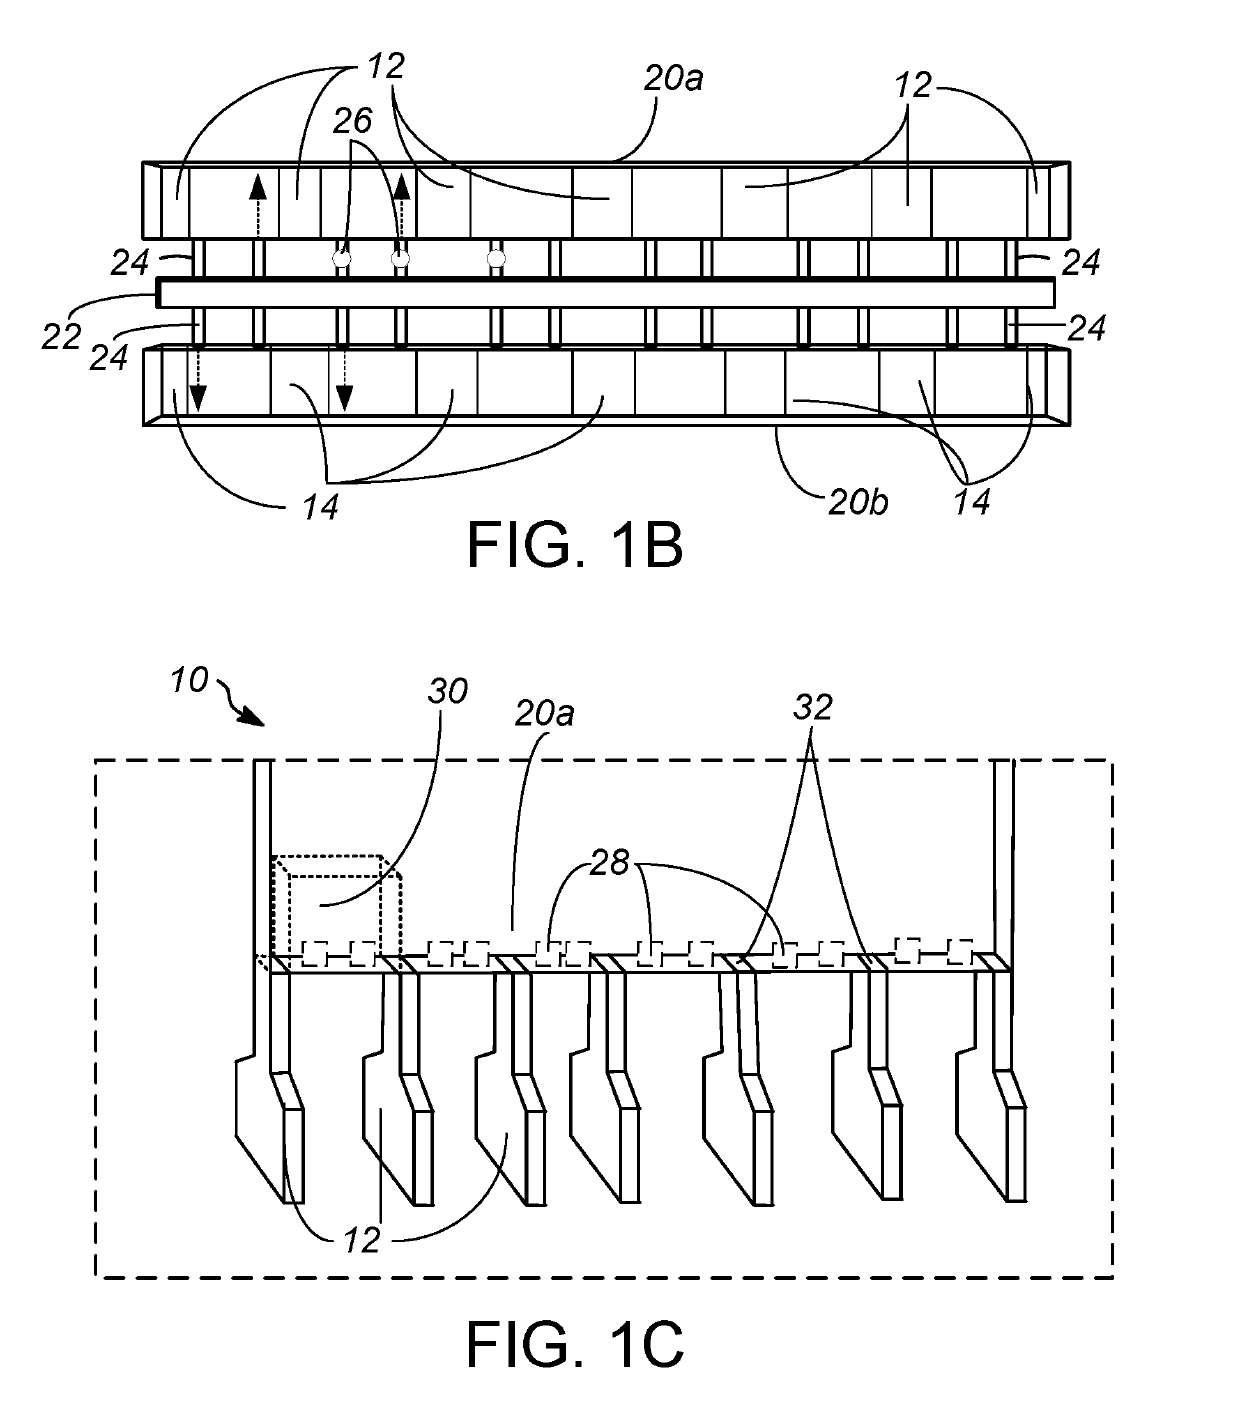 Process and apparatus for a convection charge heater having a recycle gas distributor